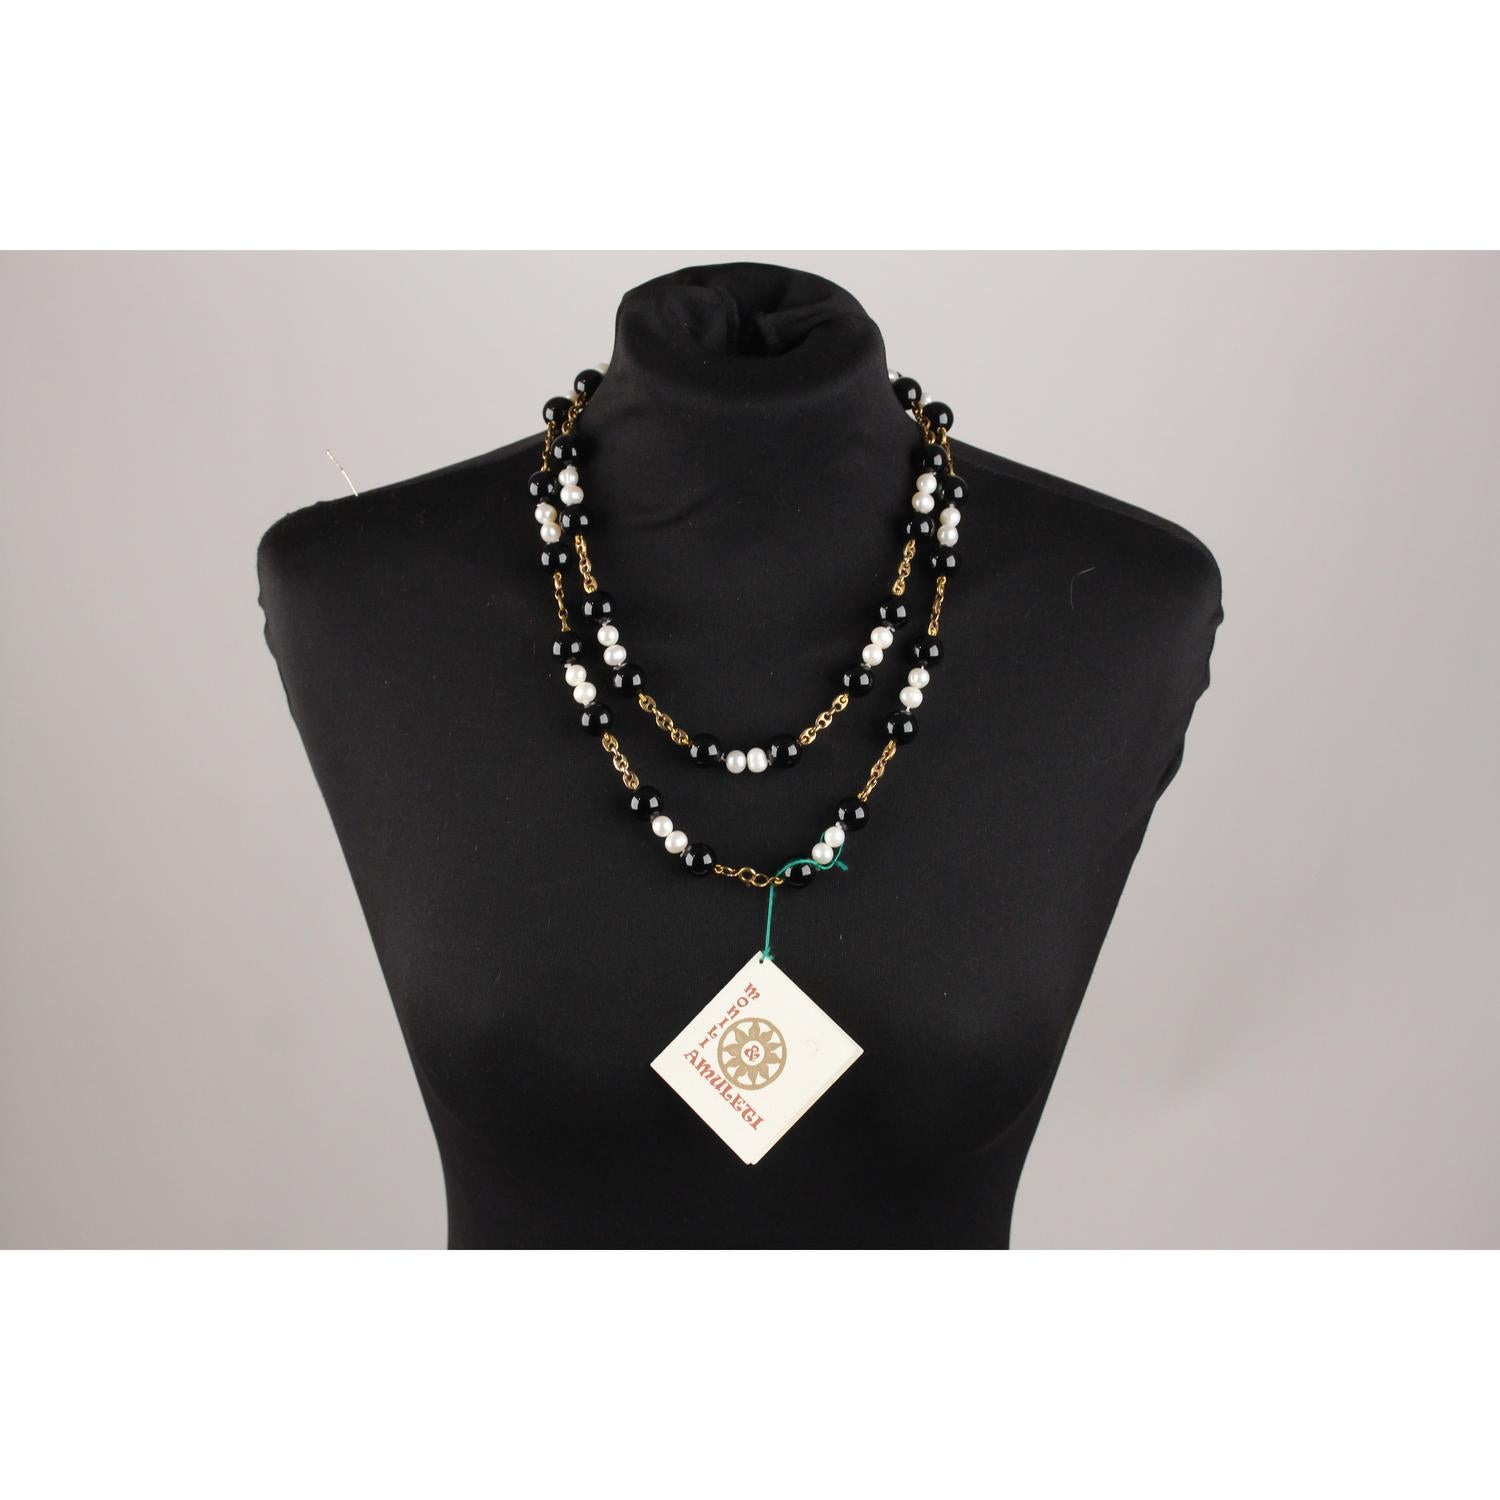 MATERIAL: Onix beads, Baroque Pearls, Silver

COLOR: Black, White

COUNTRY OF MANUFACTURE: Italy

Condition
CONDITION DETAILS:

A+ :MINT CONDITION! Mint item. Never worn or used